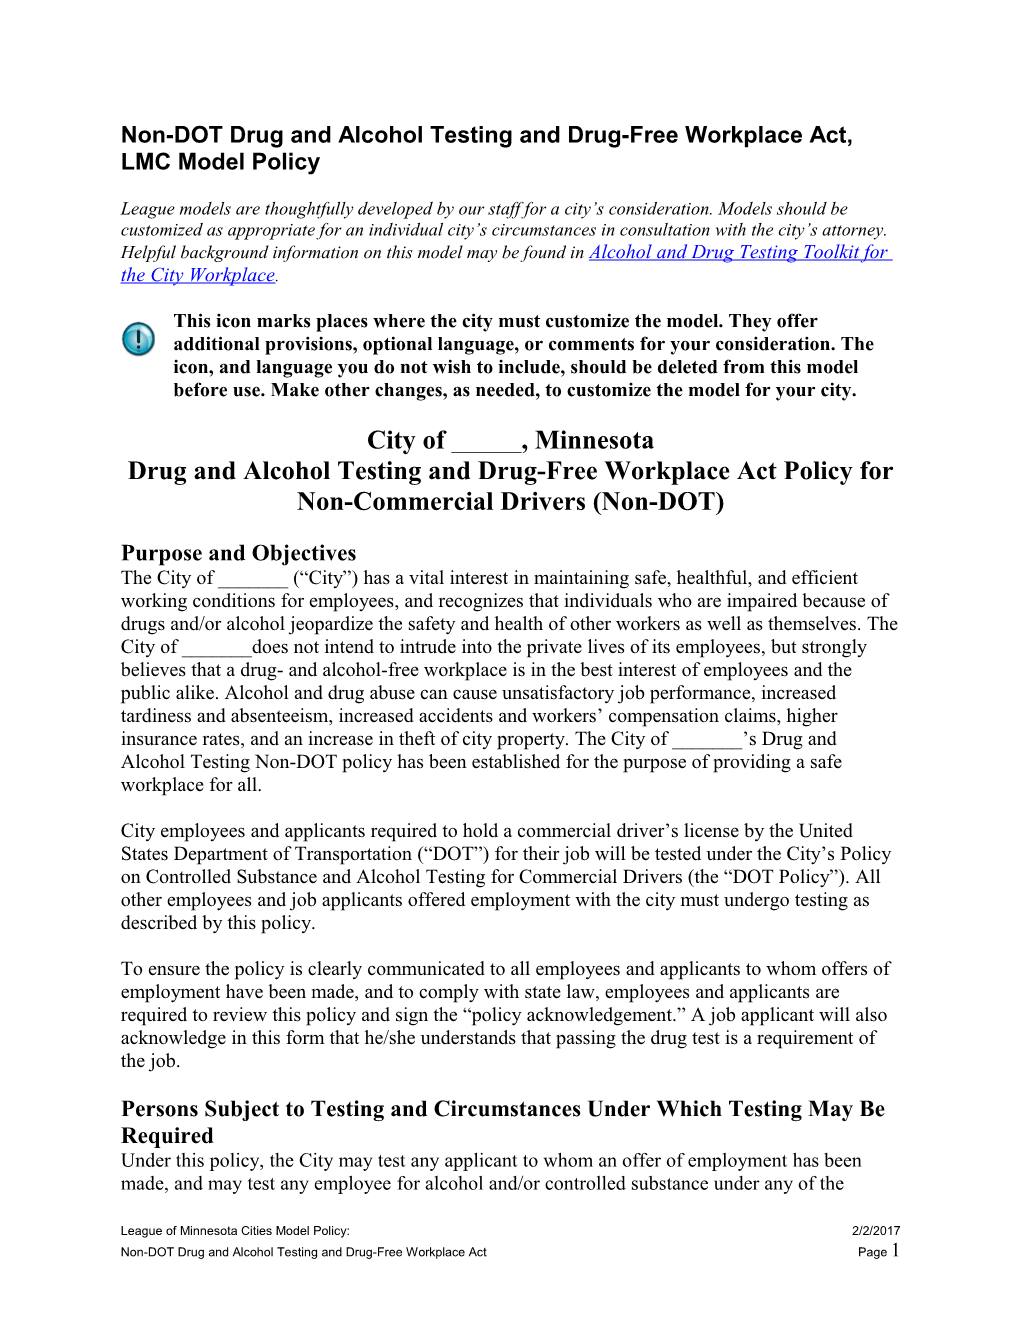 Non-DOT Drug and Alcohol Testing and Drug-Free Workplace Act